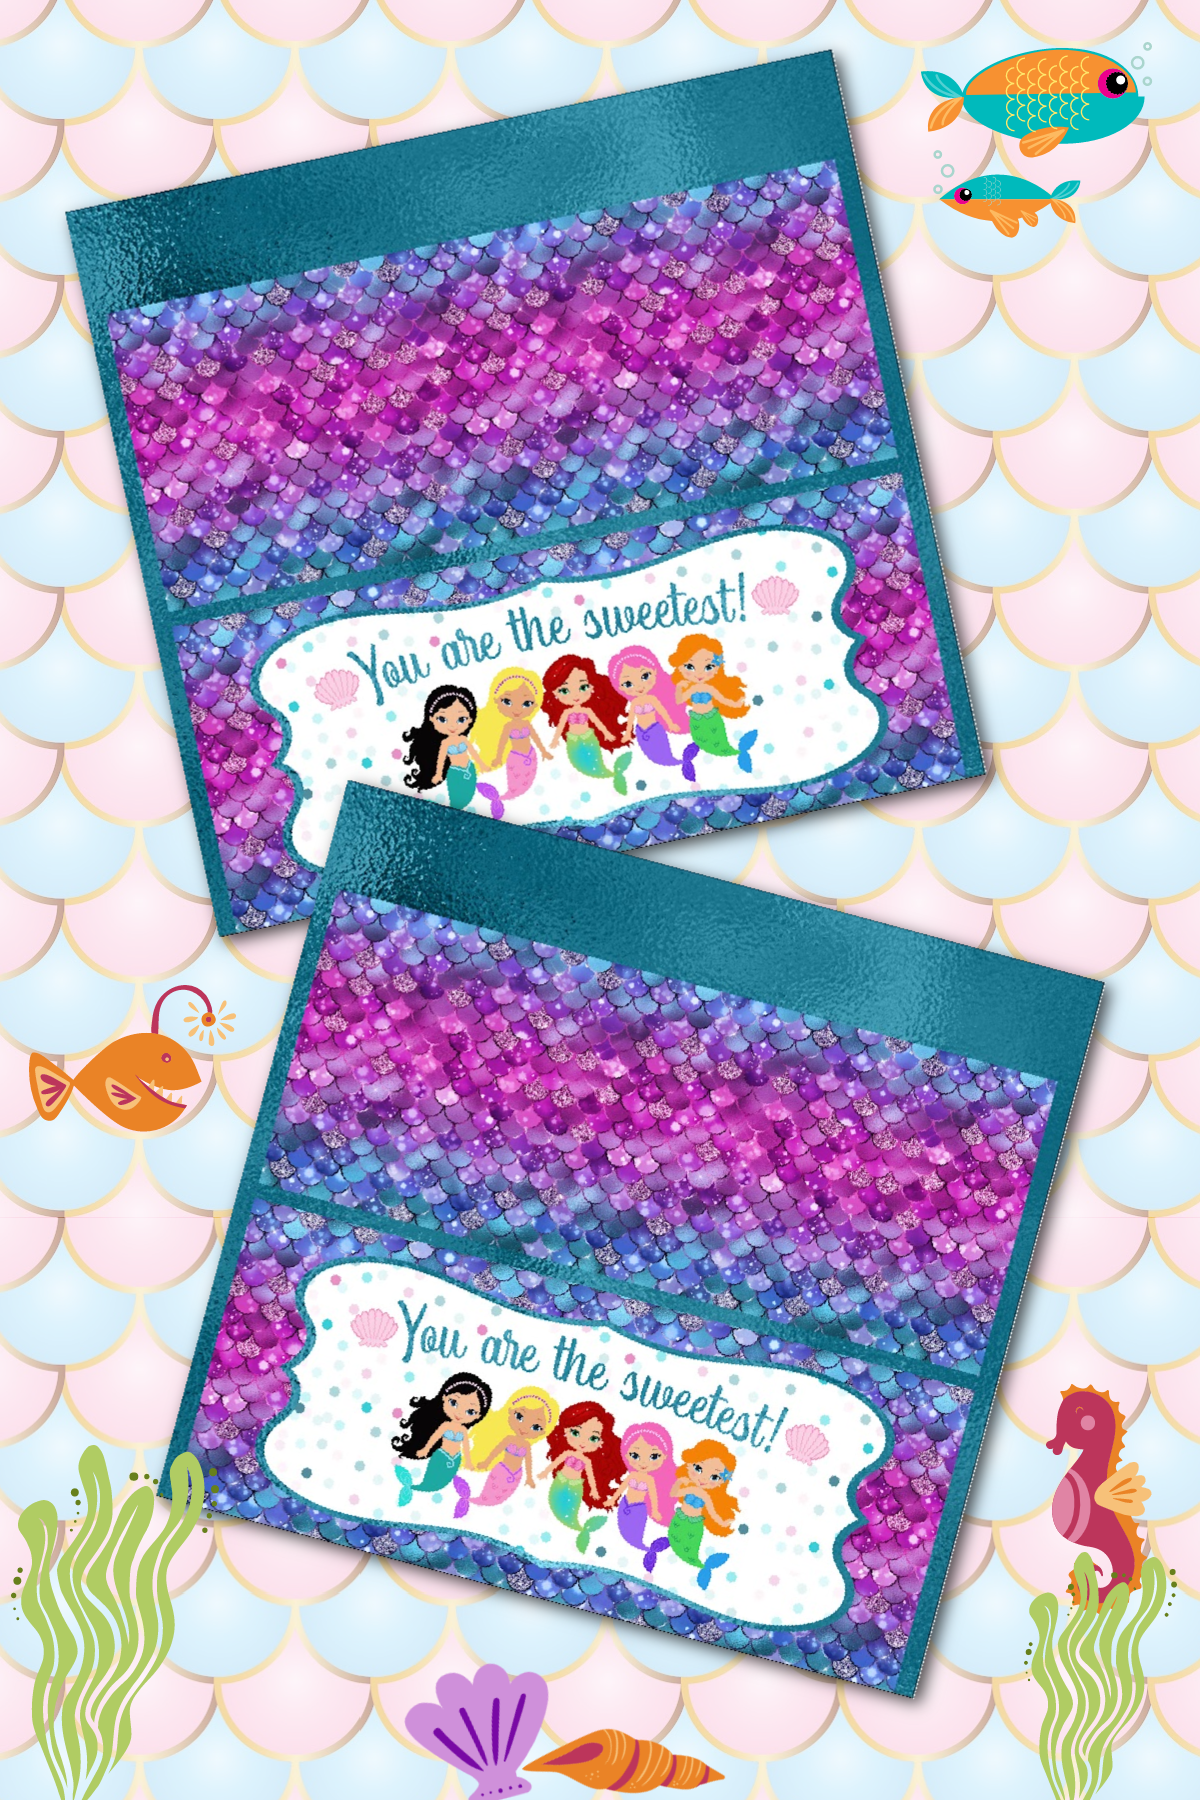 Mermaid Candy Bar Wrapper with ocean graphics